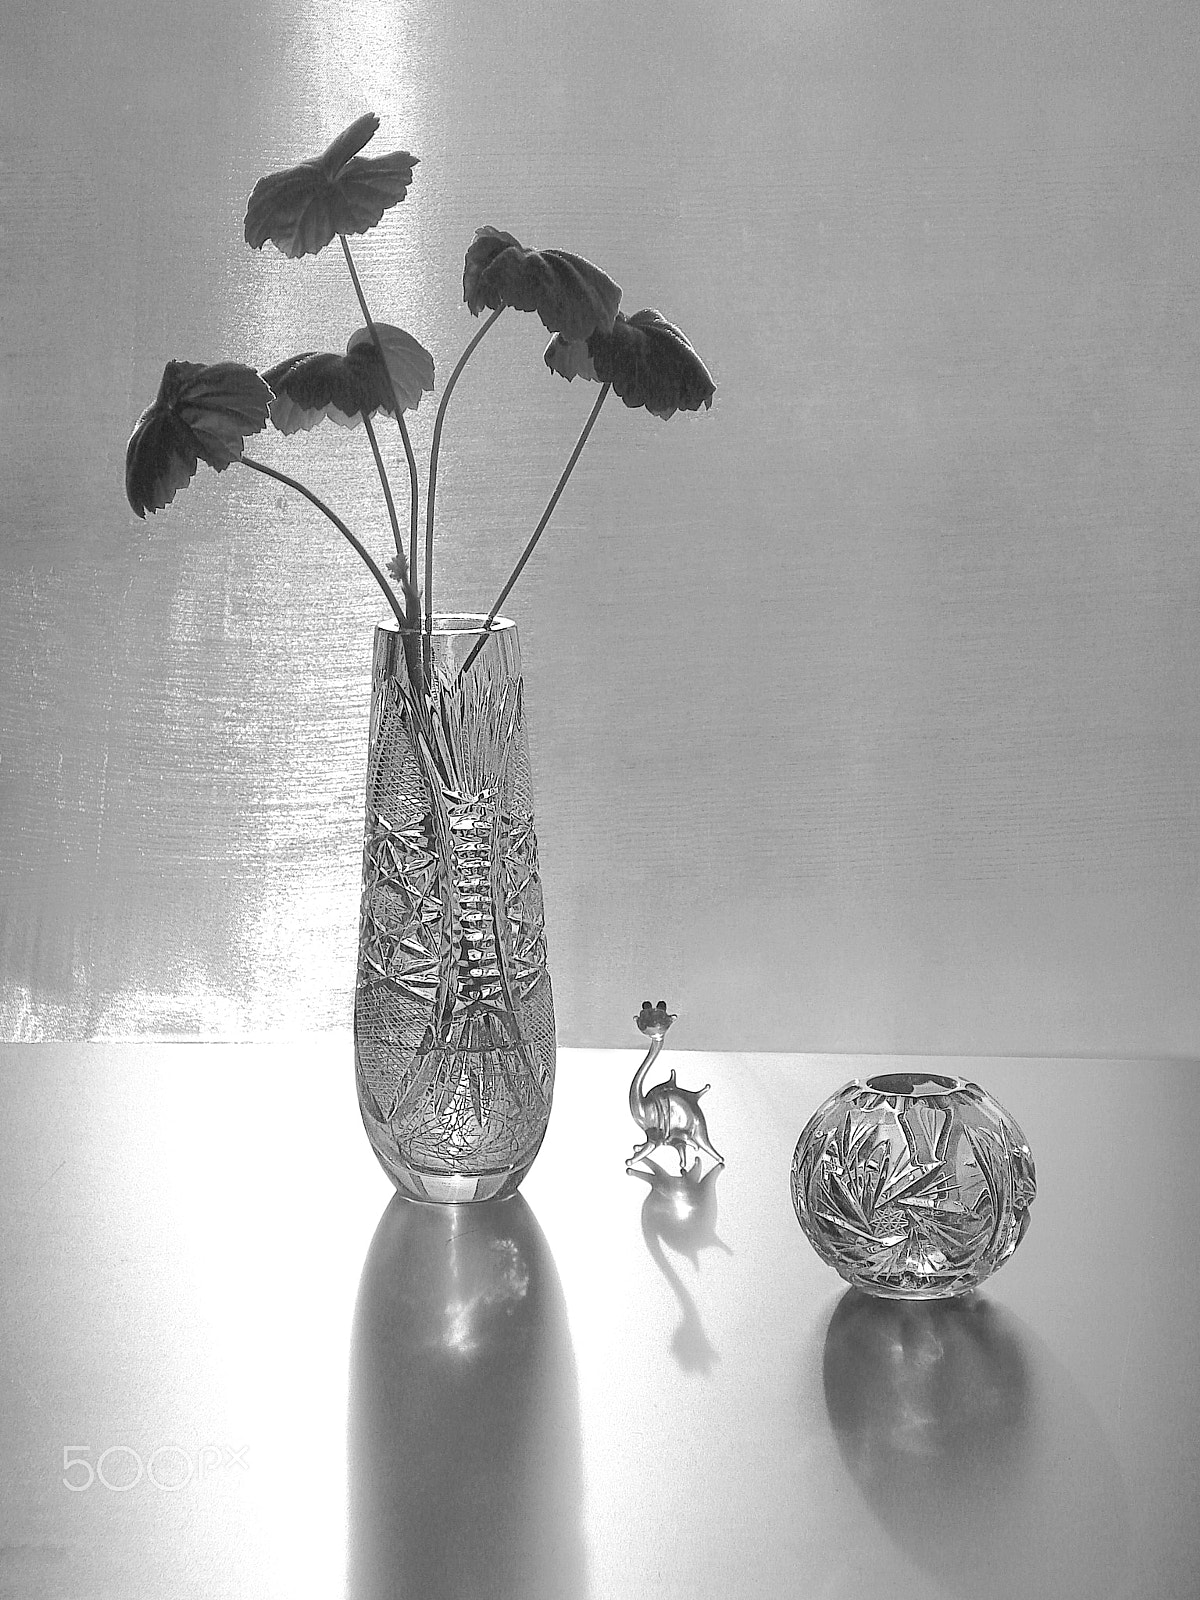 Sony DSC-W70 sample photo. This black and white photo shows beauty of crystal vases emphasized with light photography